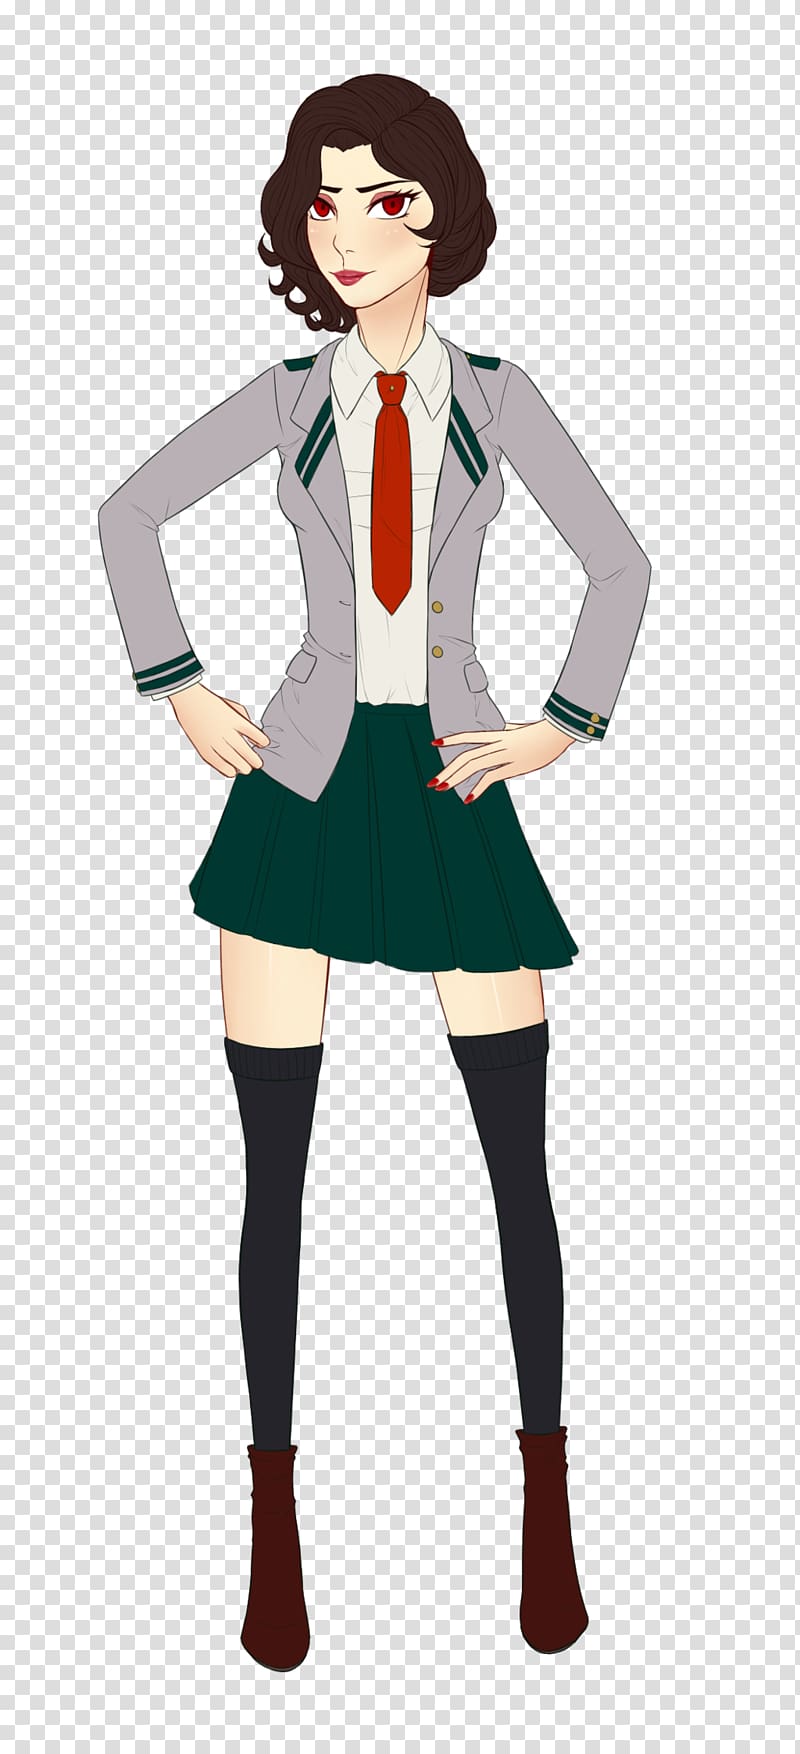 School uniform My Hero Academia Costume Black Widow, others transparent background PNG clipart